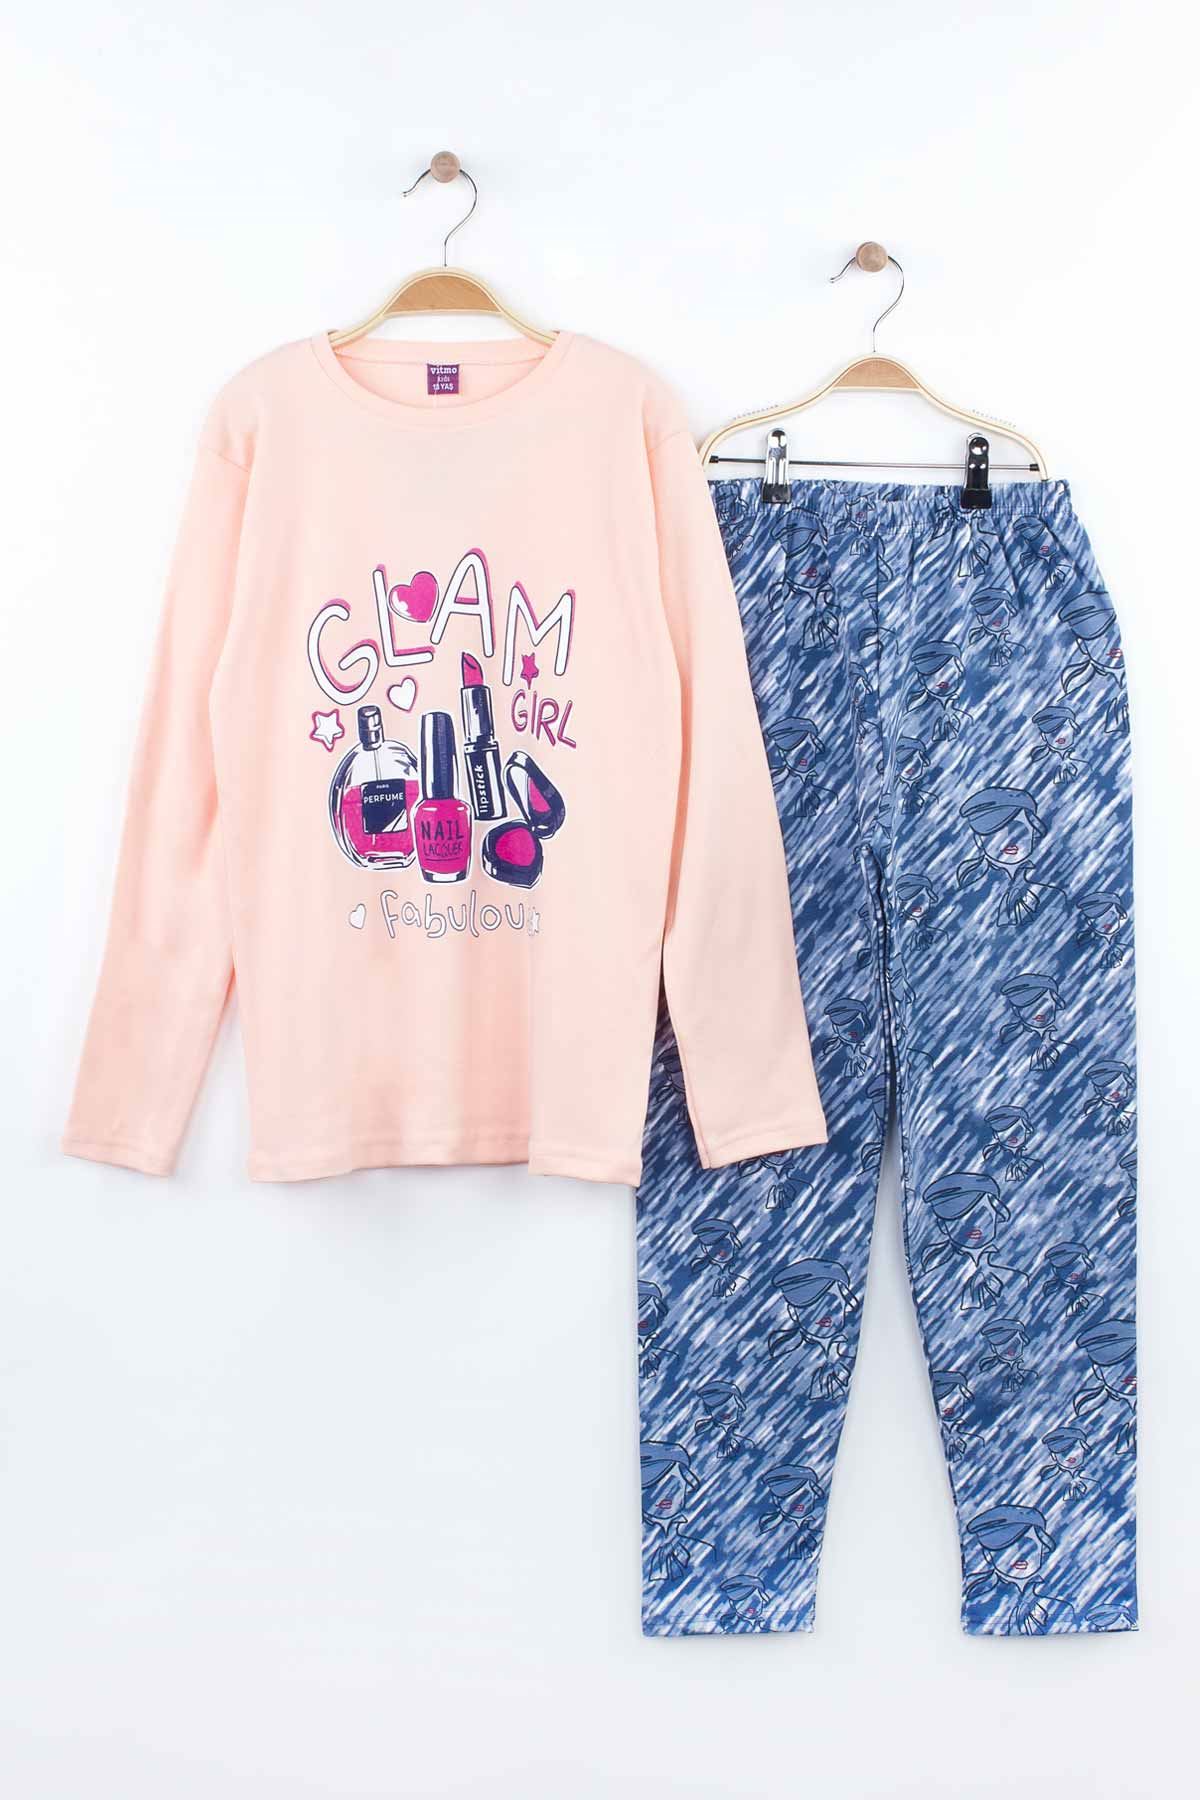 Powder Pink Girls Child Teen Young Pajamas Set Tracksuits Home Use Cotton Fabric Comfortable Clothes 2 Piece Girl Set Models